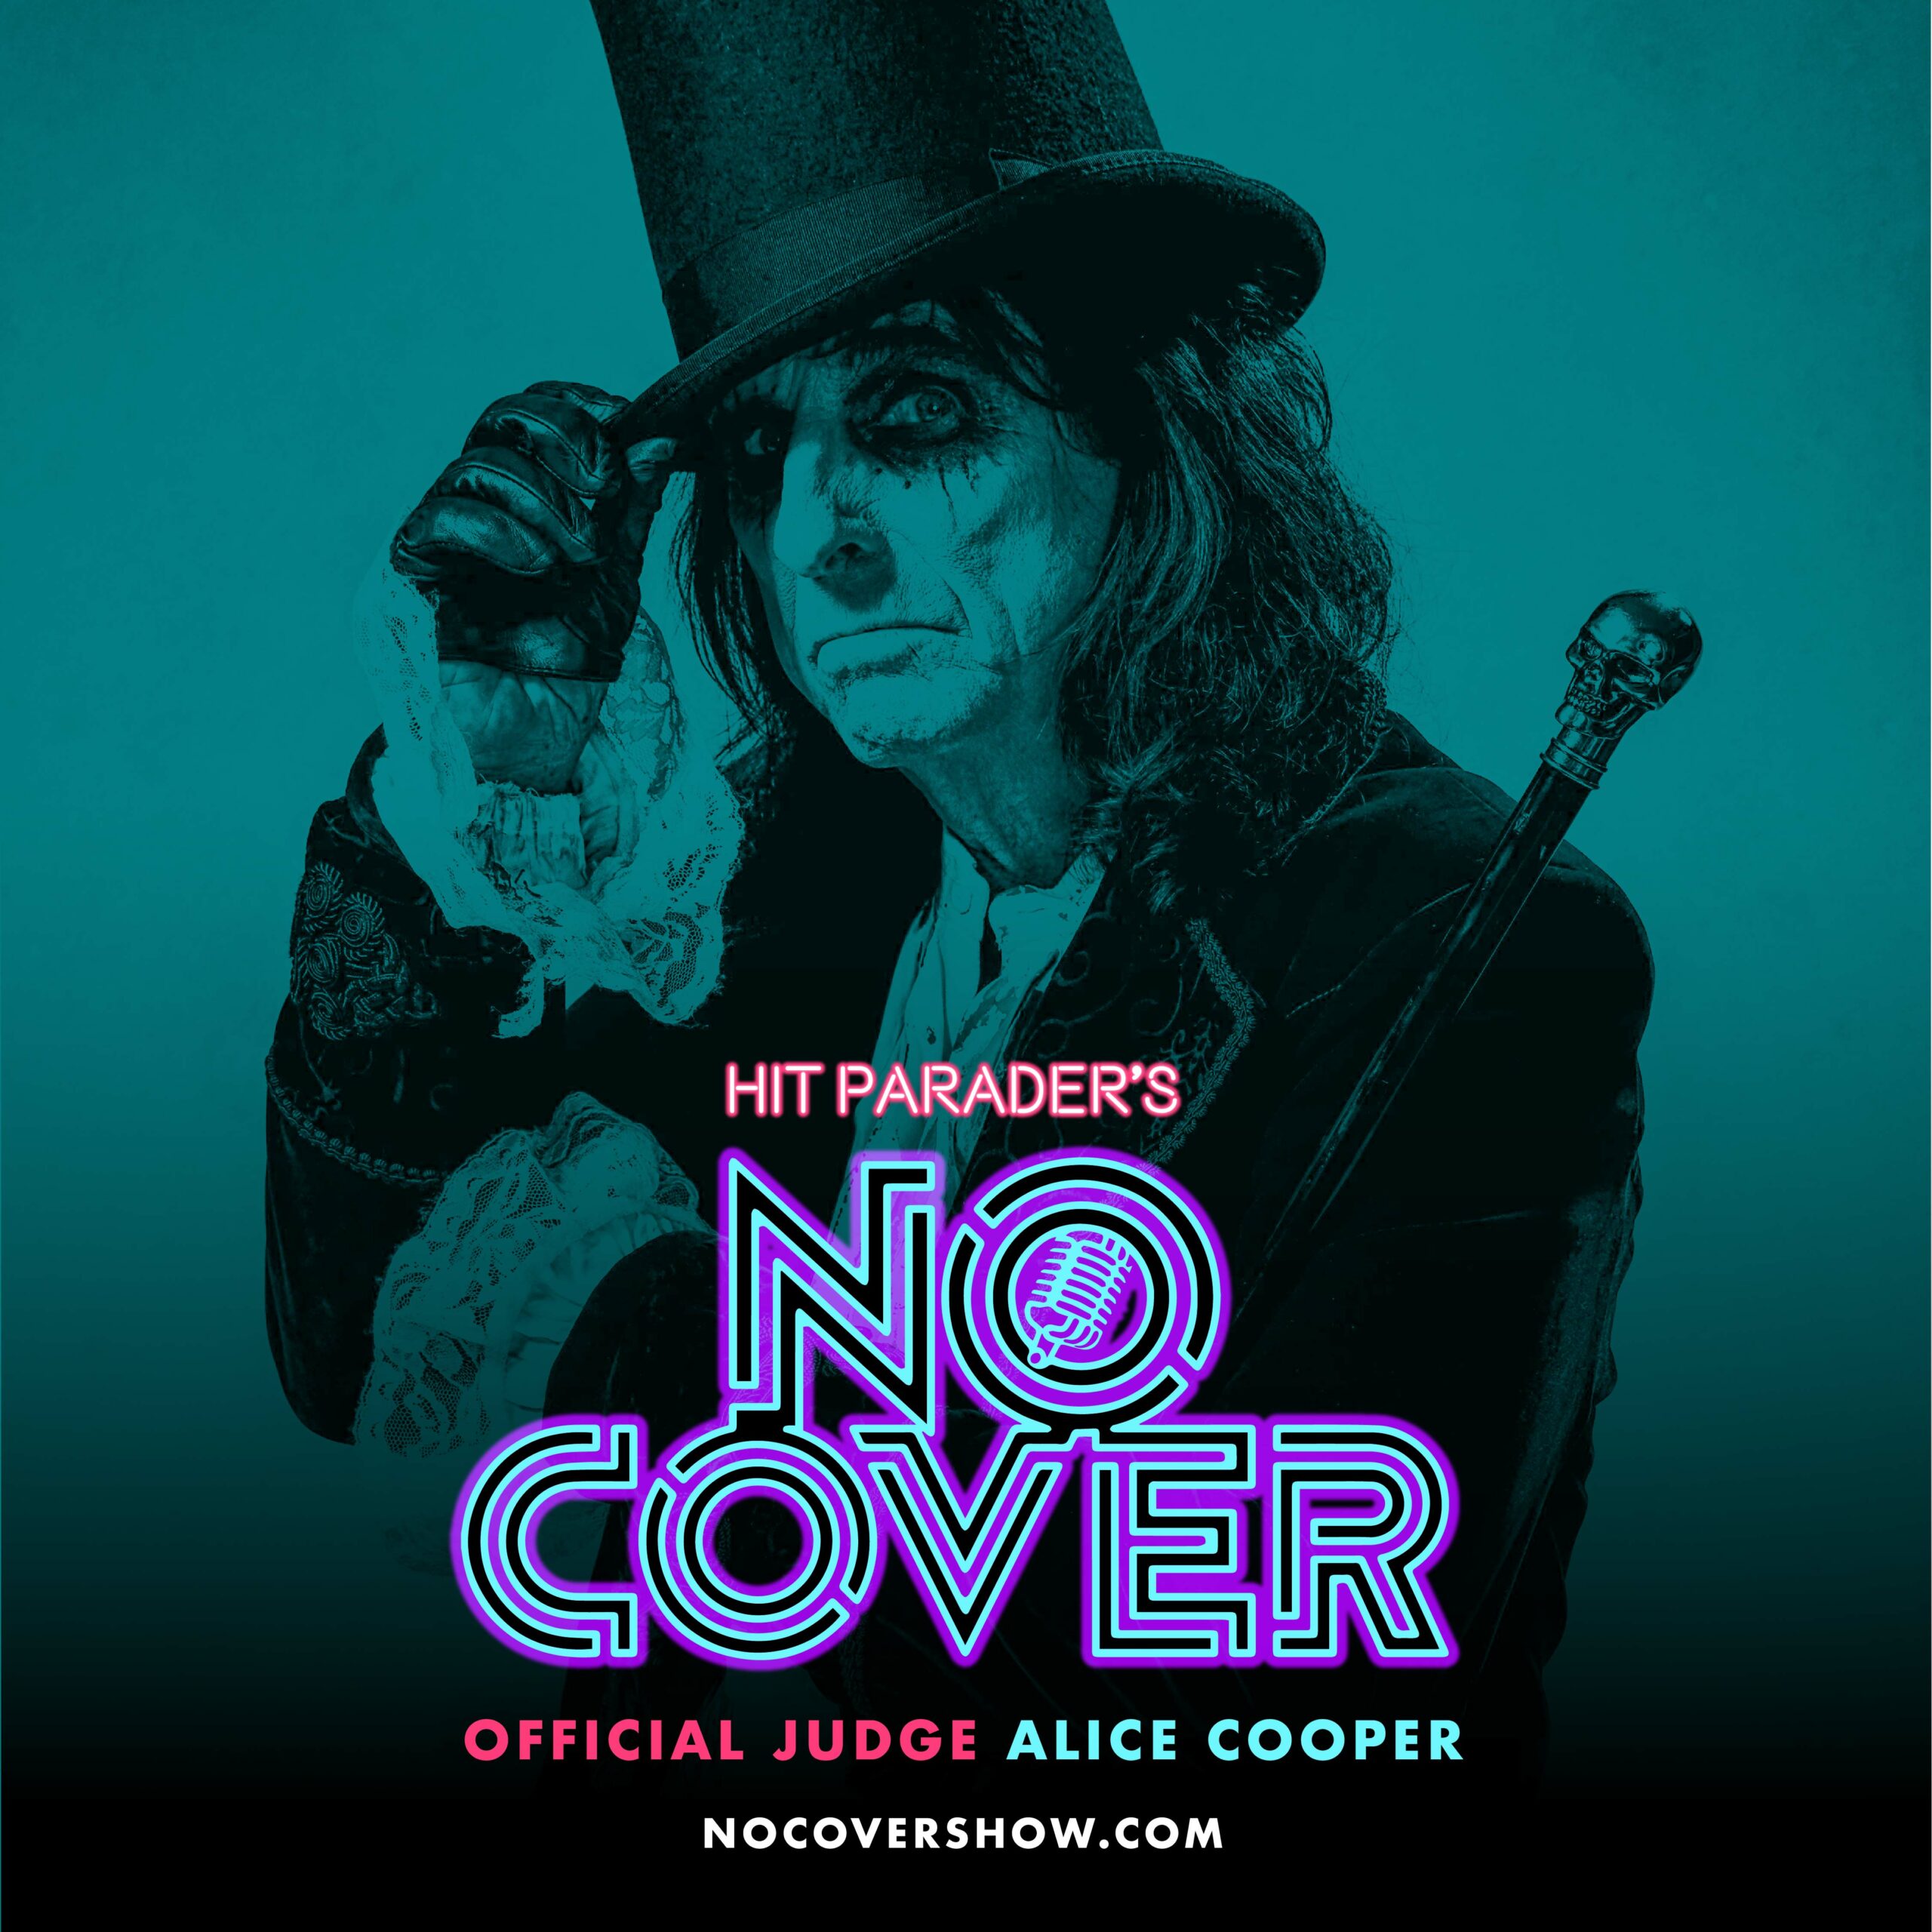 HIT PARADER'S “NO COVER” ANNOUNCES ALL-STAR JUDGES ALICE COOPER, BISHOP BRIGGS, GAVIN ROSSDALE, LZZY HALE AND MORE | Alice Cooper